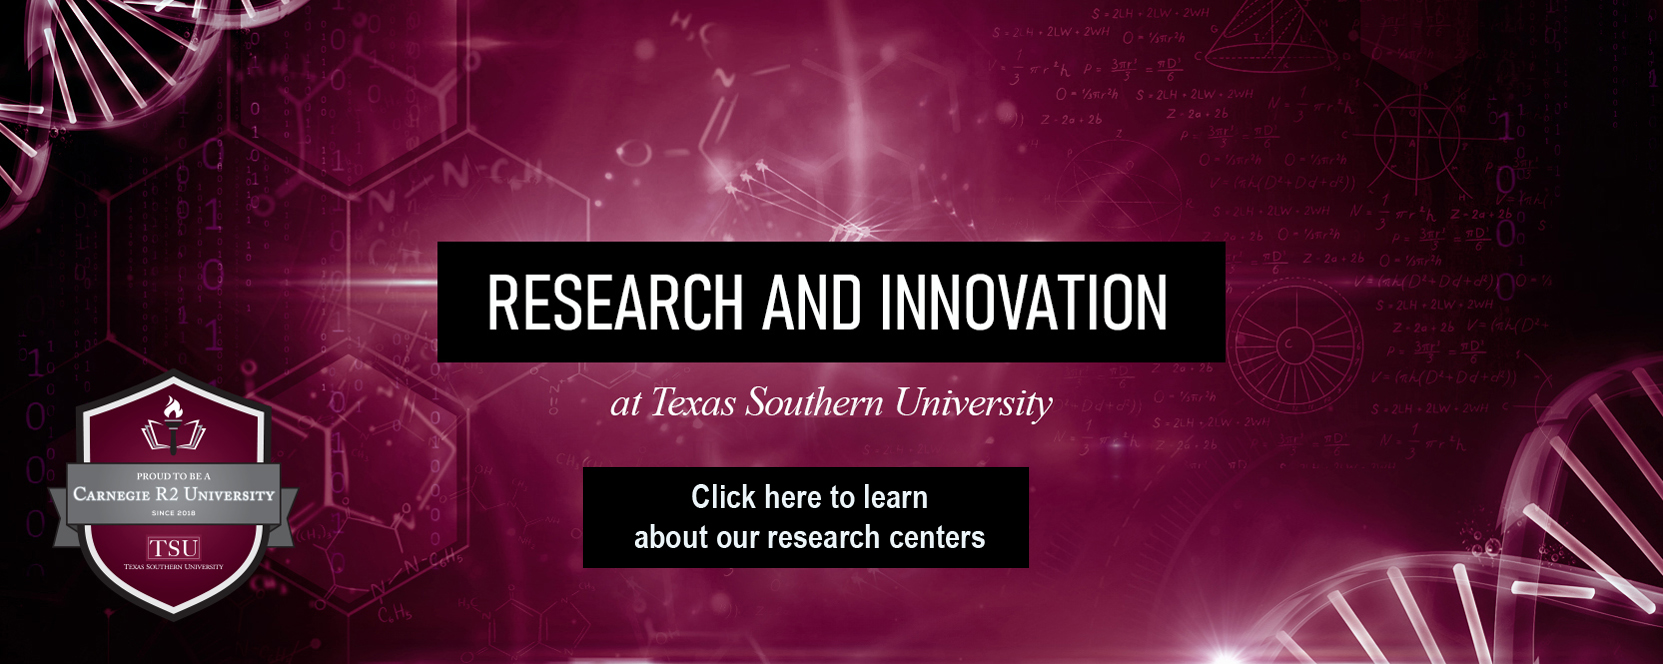 research-and-innovation-slider-new